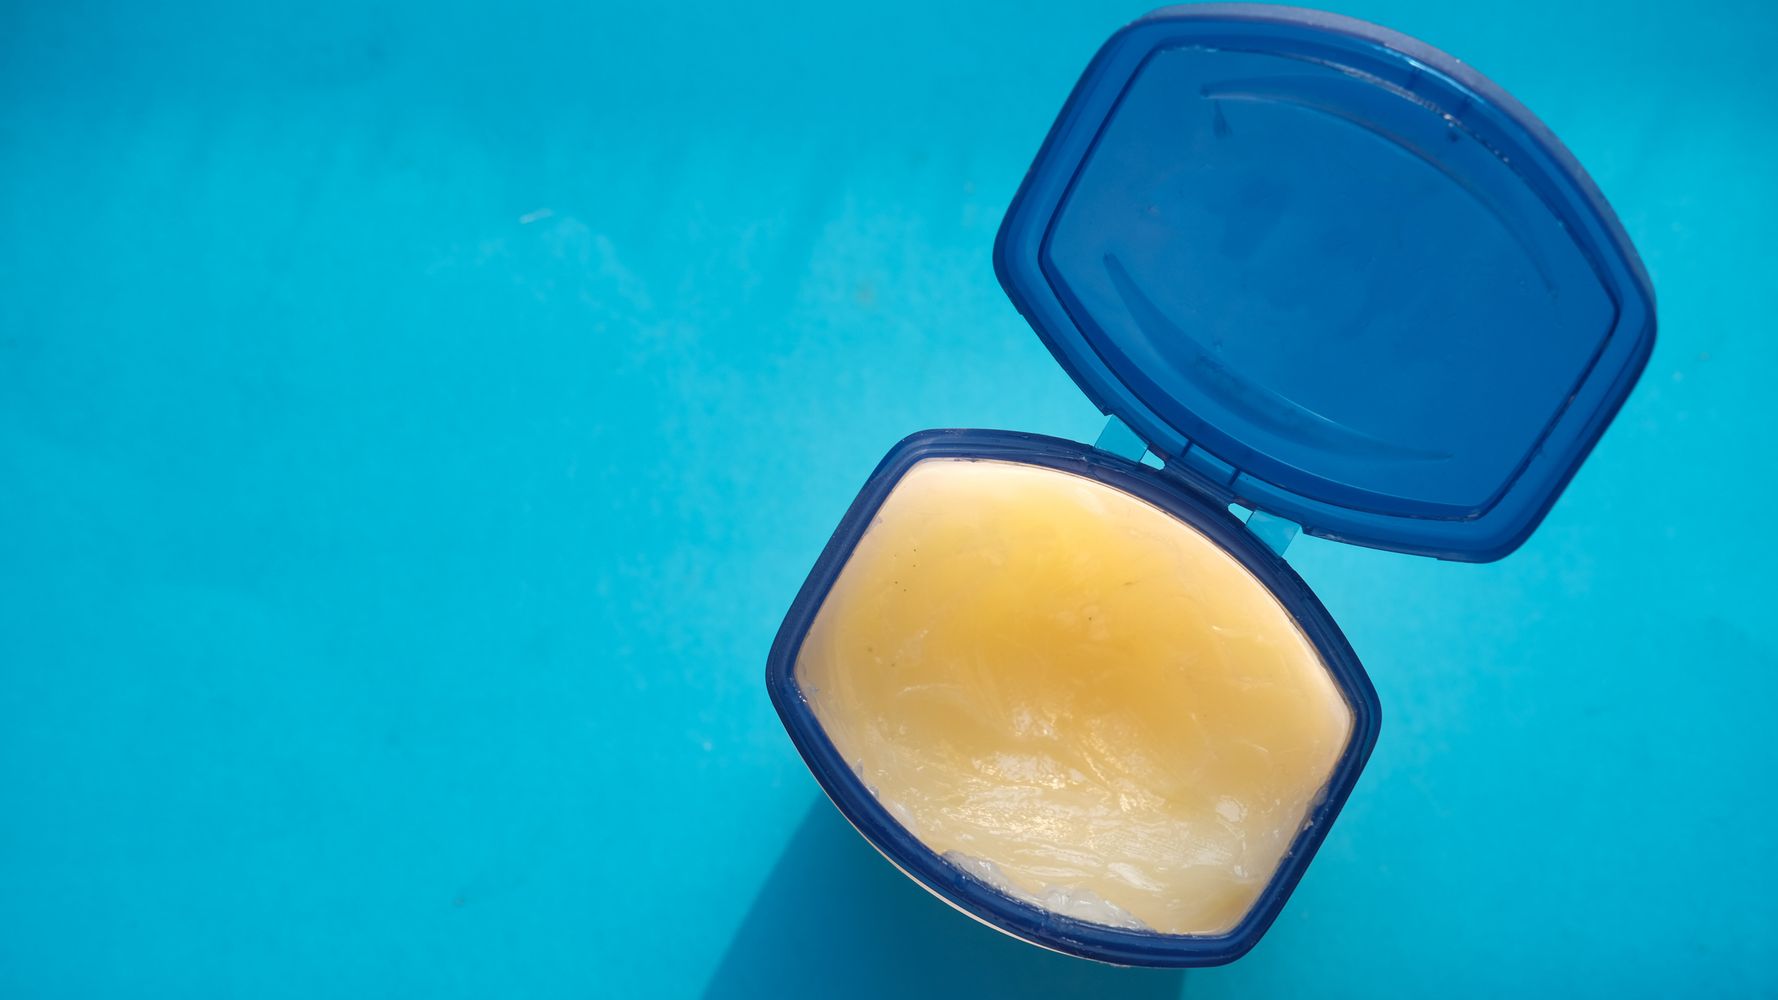 Vaseline Is The Best Skin Care Product You’re Probably Sleeping On